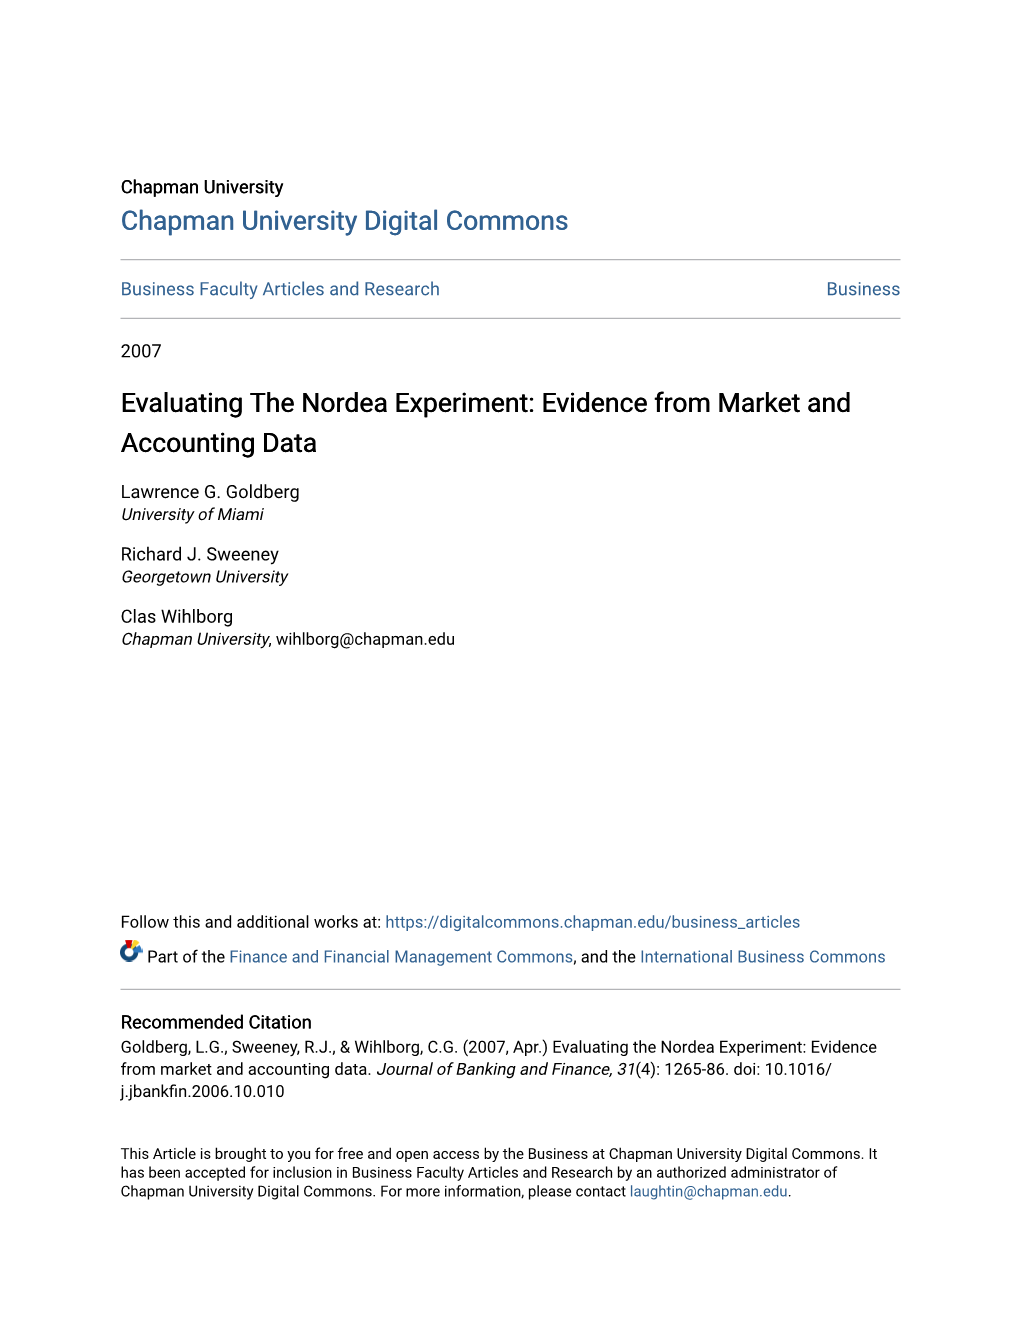 Evaluating the Nordea Experiment: Evidence from Market and Accounting Data